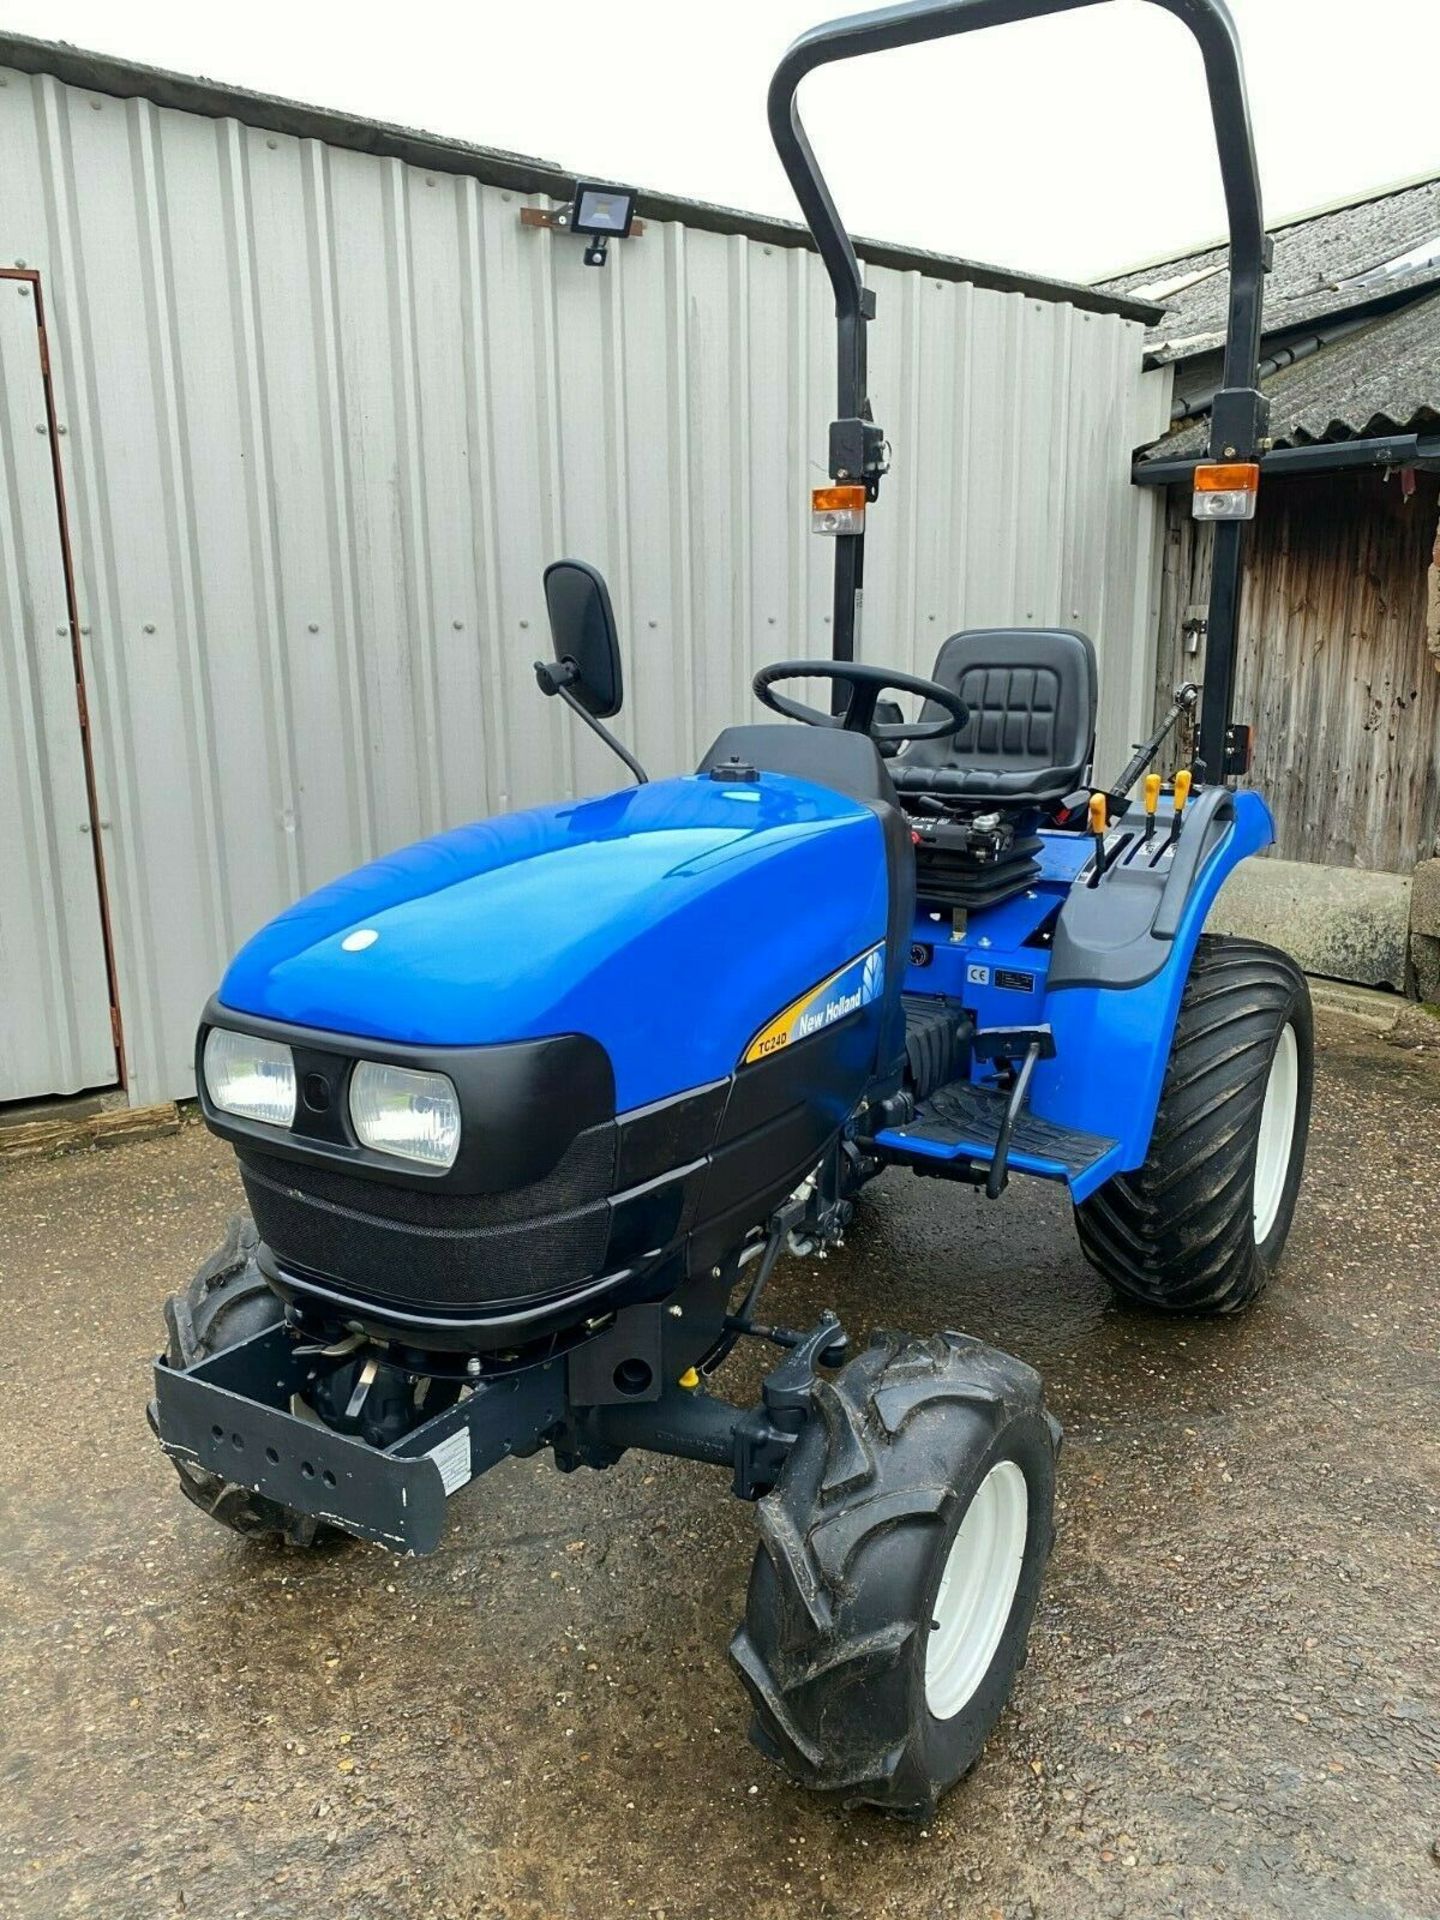 COMPACT TRACTOR NEW HOLLAND TC24D, 4 X 4, ONLY 368 HOURS GENUINE FROM NEW, HYDROSTATIC DRIVE - Image 2 of 8